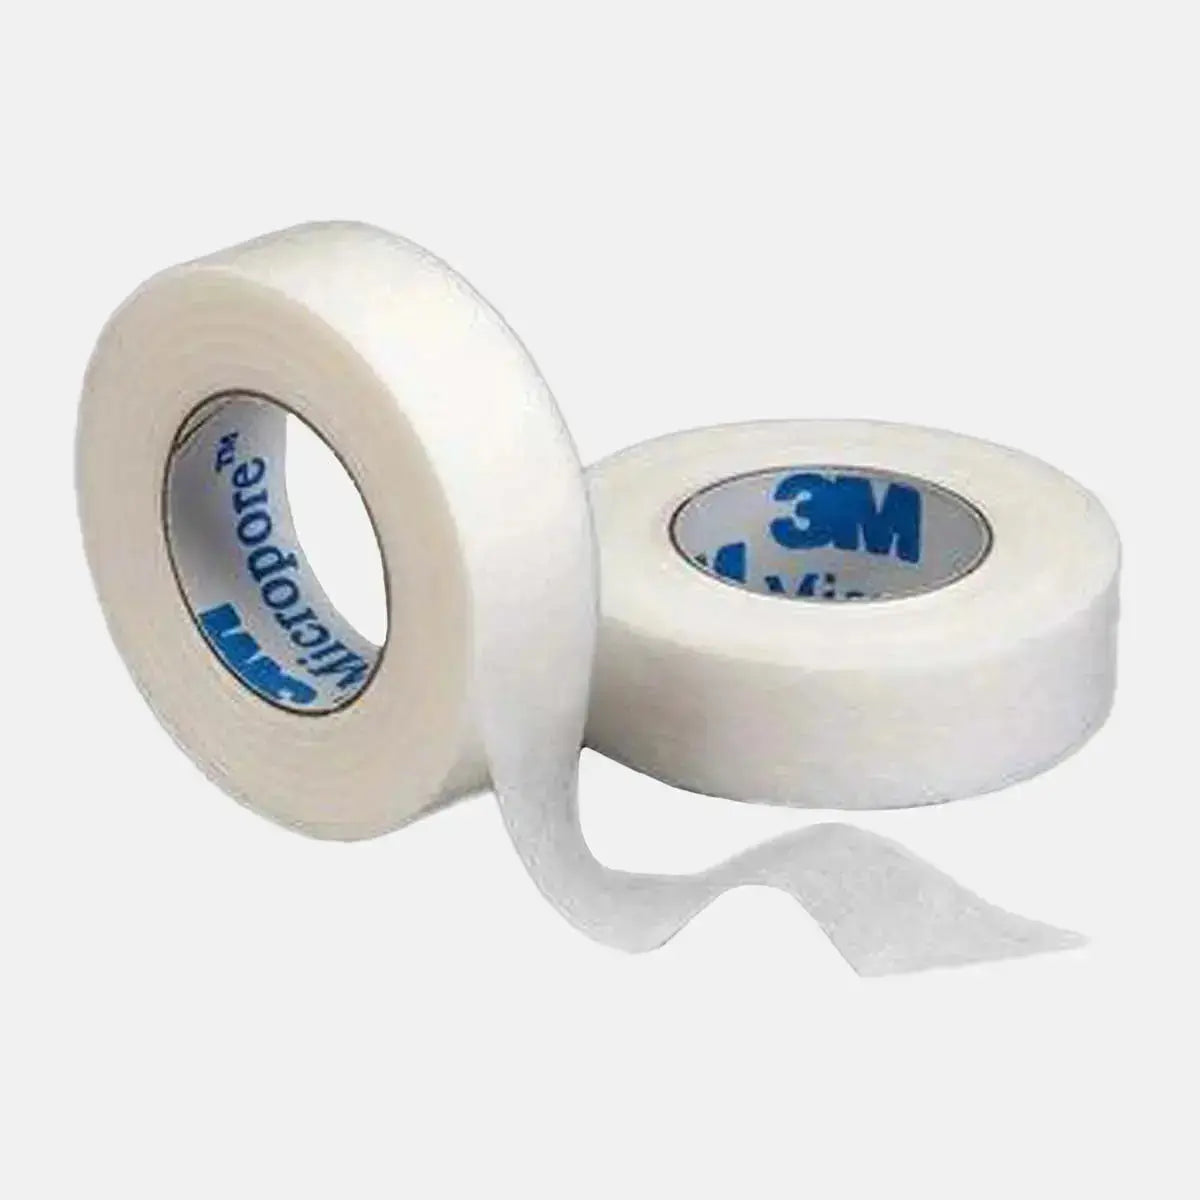 3M Paper Tape for Eyelash Extensions